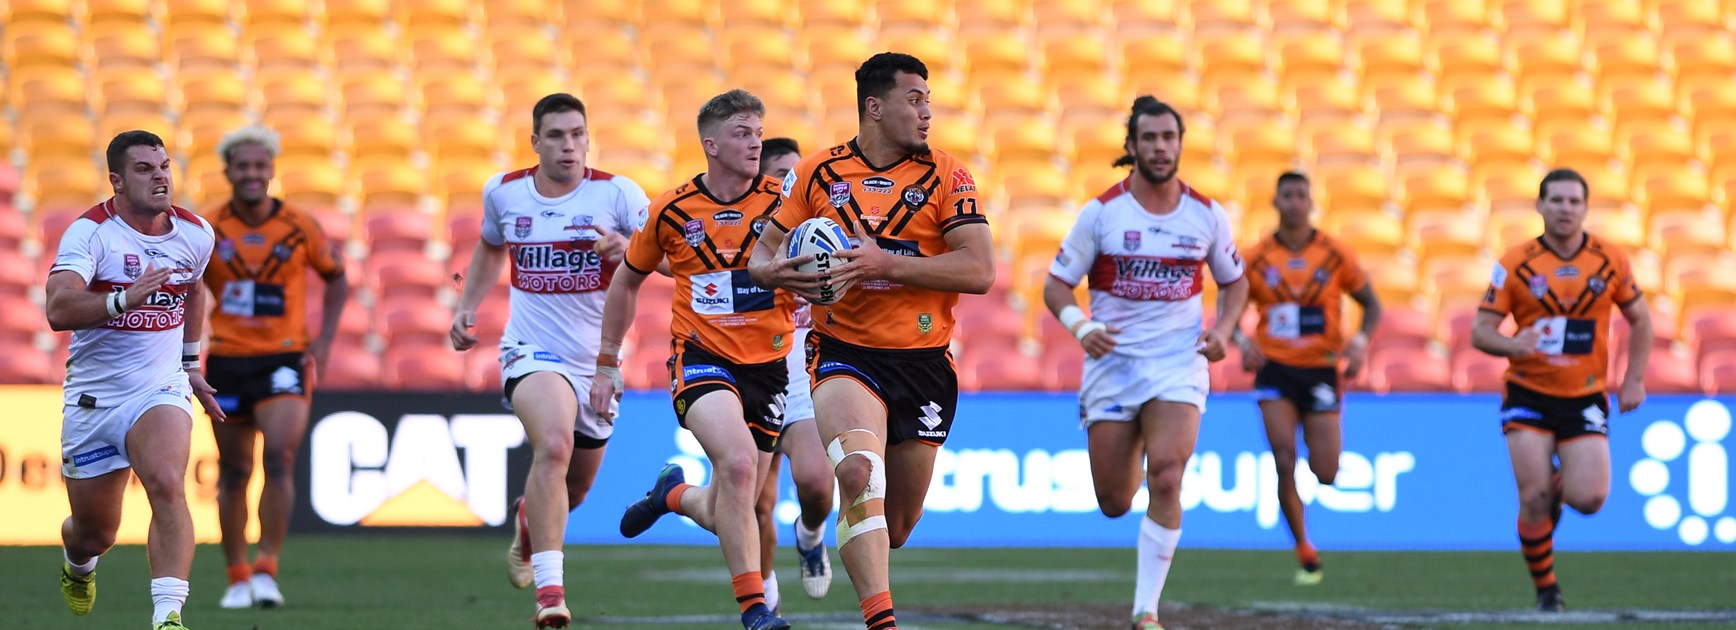 Cup players named for Junior Kiwis